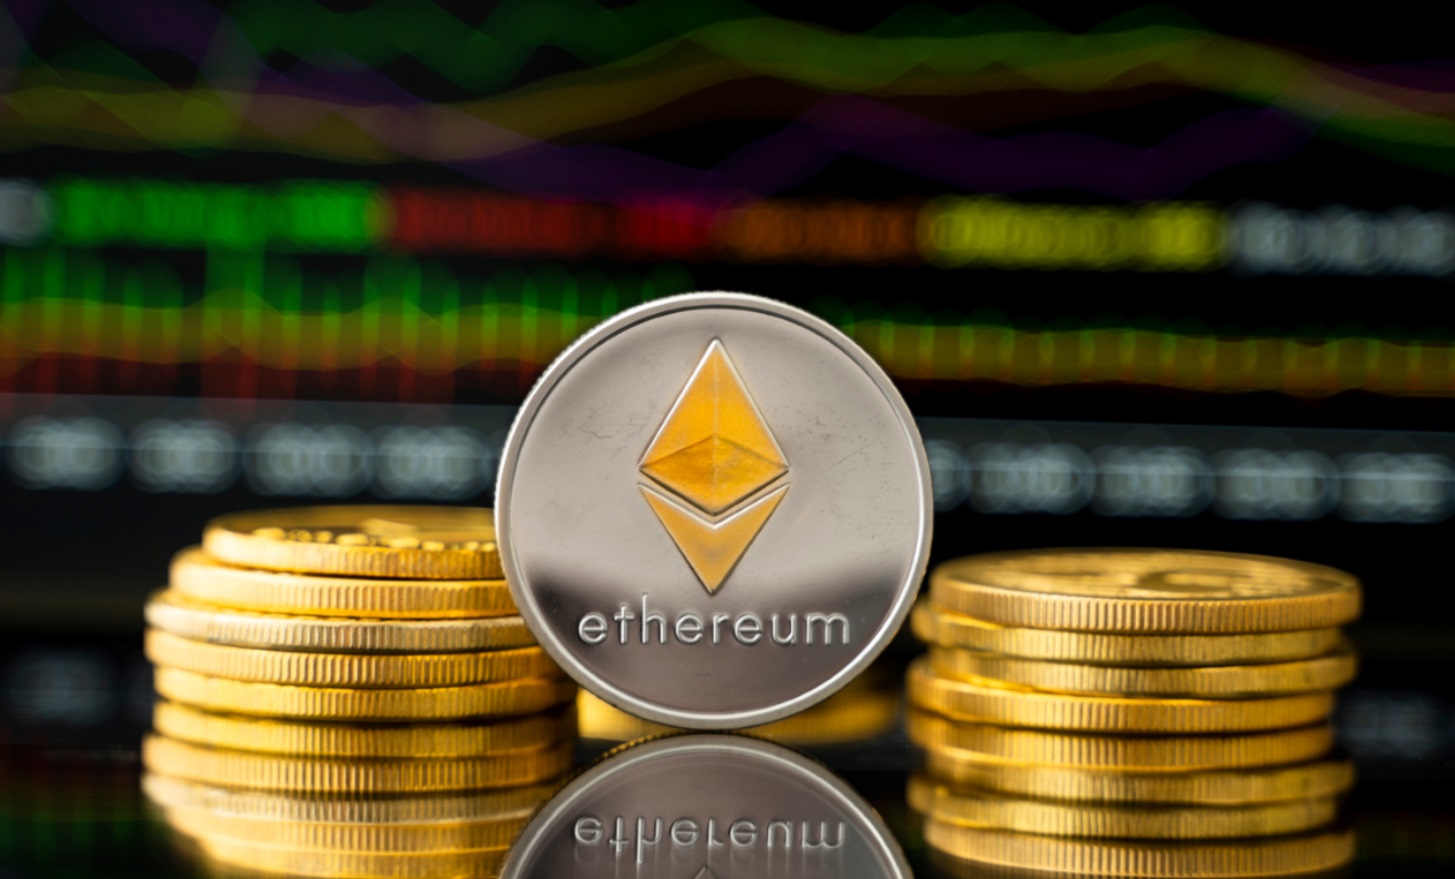 You can now buy Ethereum, which gained 7% in 24 hours: heres where